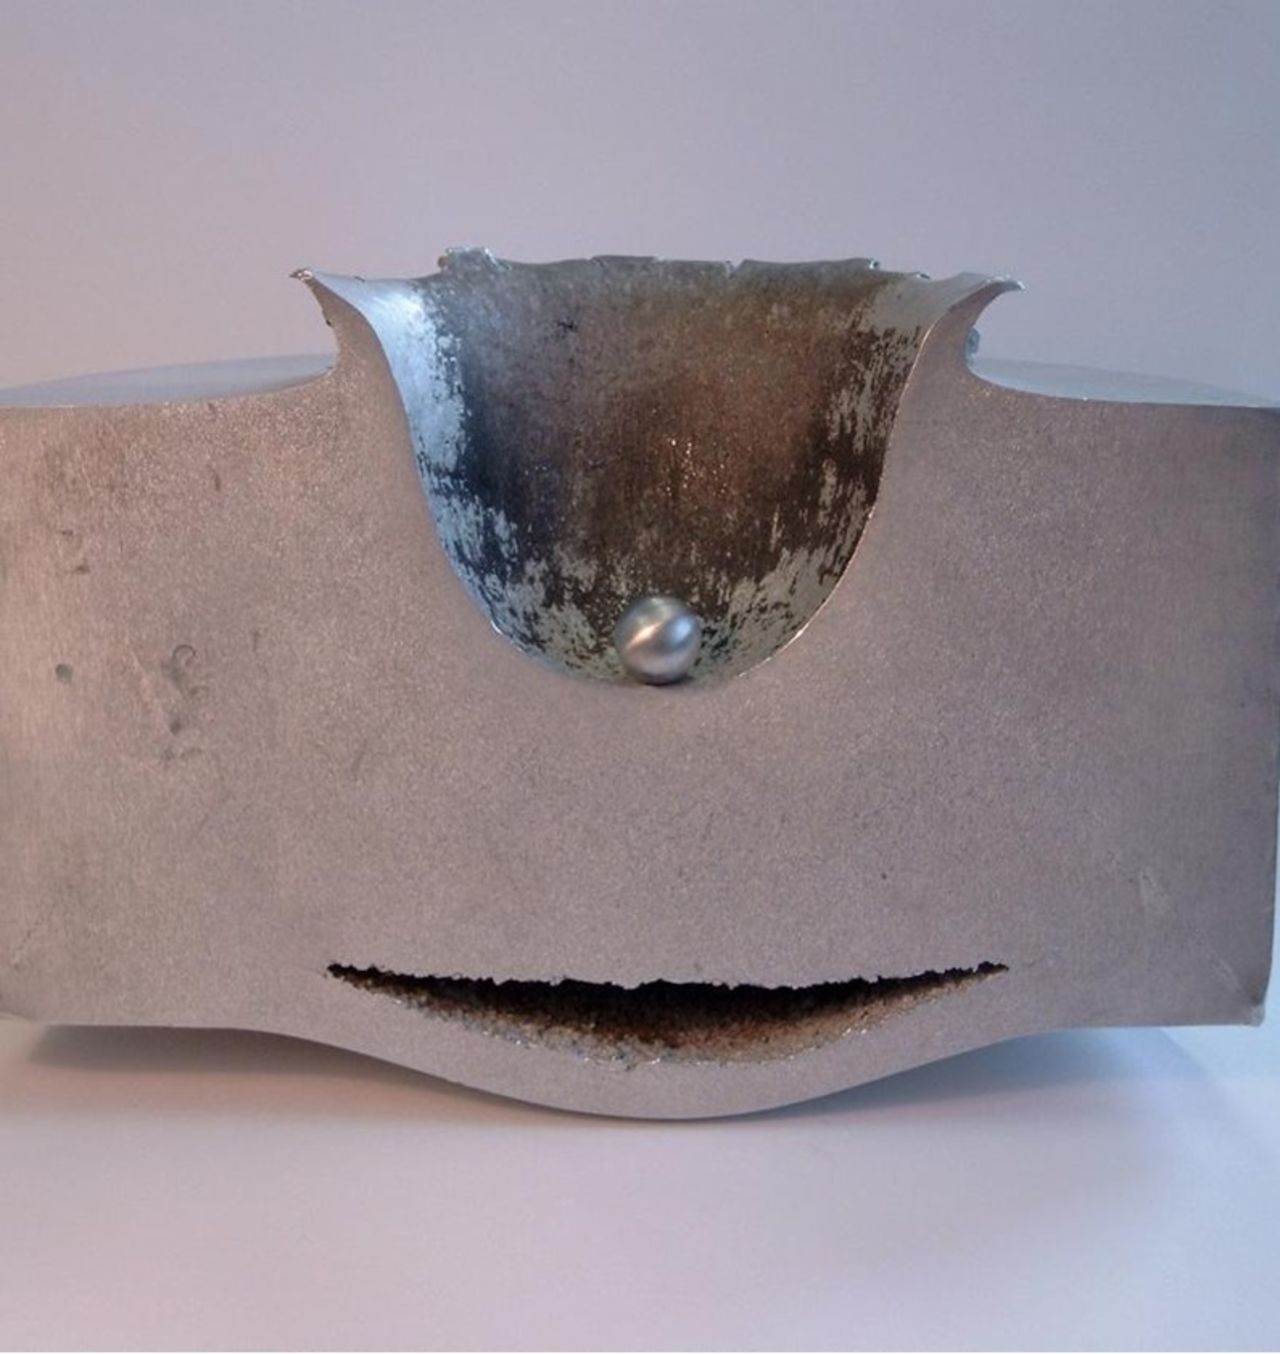 Hyper-velocity testing is a key part of engineering spacecraft fit for orbit. This 2009 image from the European Space Agency shows the effect of a 0.47 inch, 0.06 ounce aluminum ball hitting a 7-inch thick aluminum block at 4.2 miles per second. The agency says the pressure and temperature of such an impact "exceeds those found at the center of the Earth."